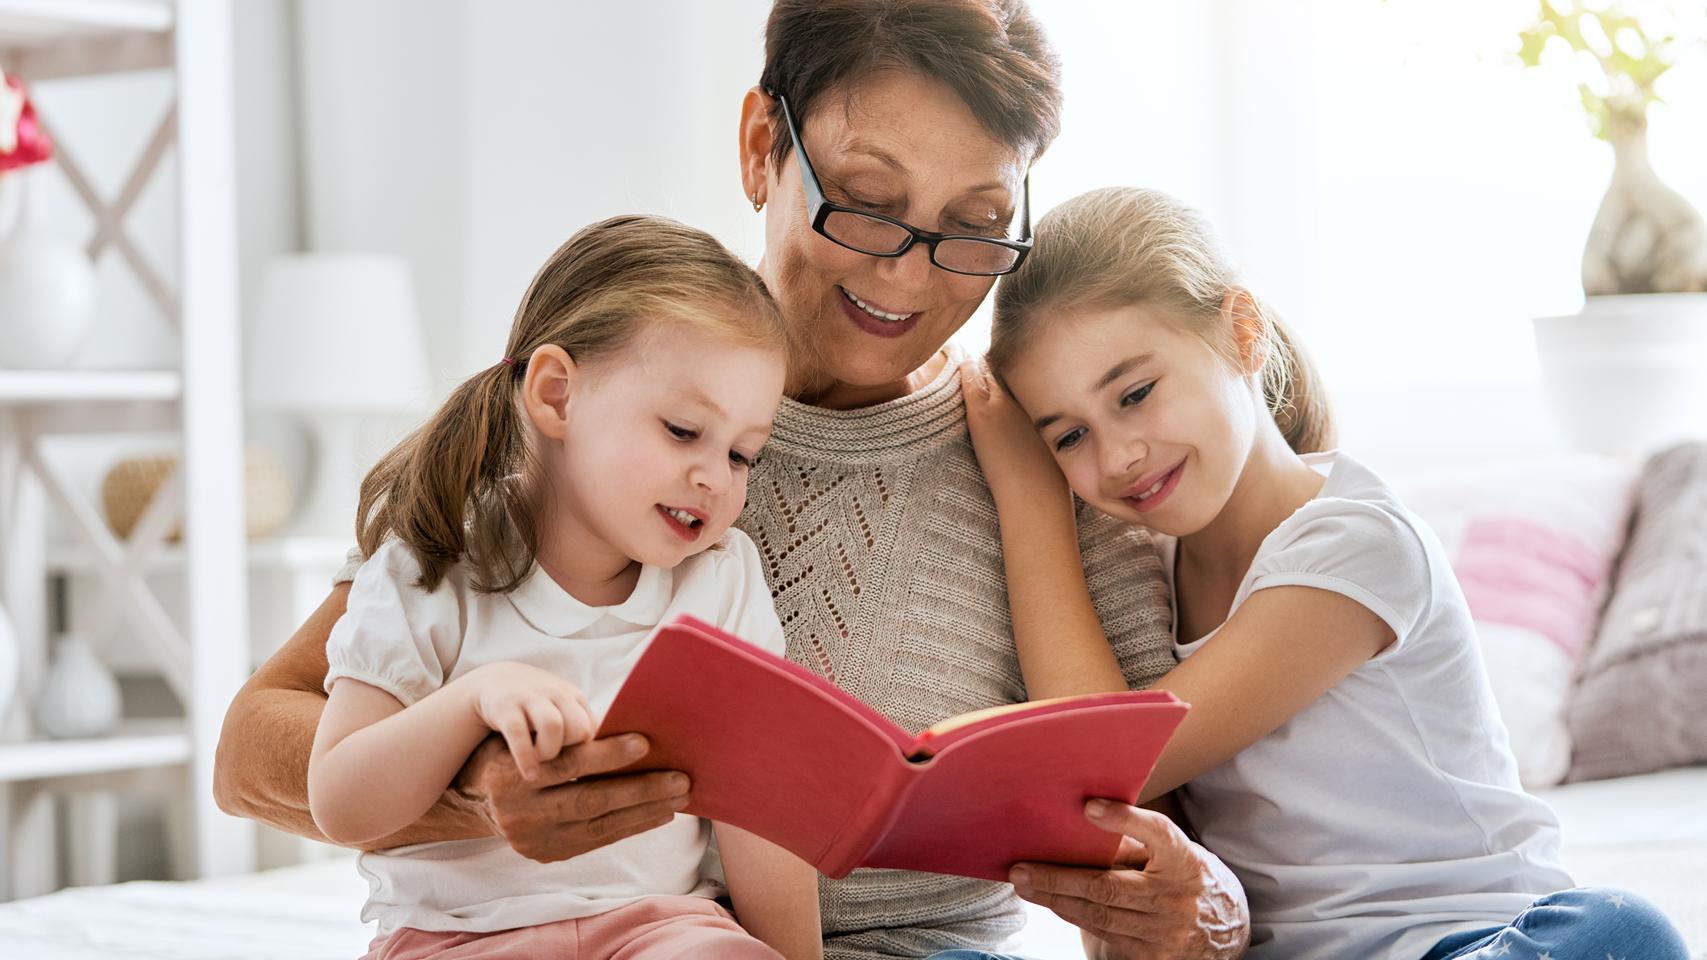 Grandmother reading a book to granddaughters